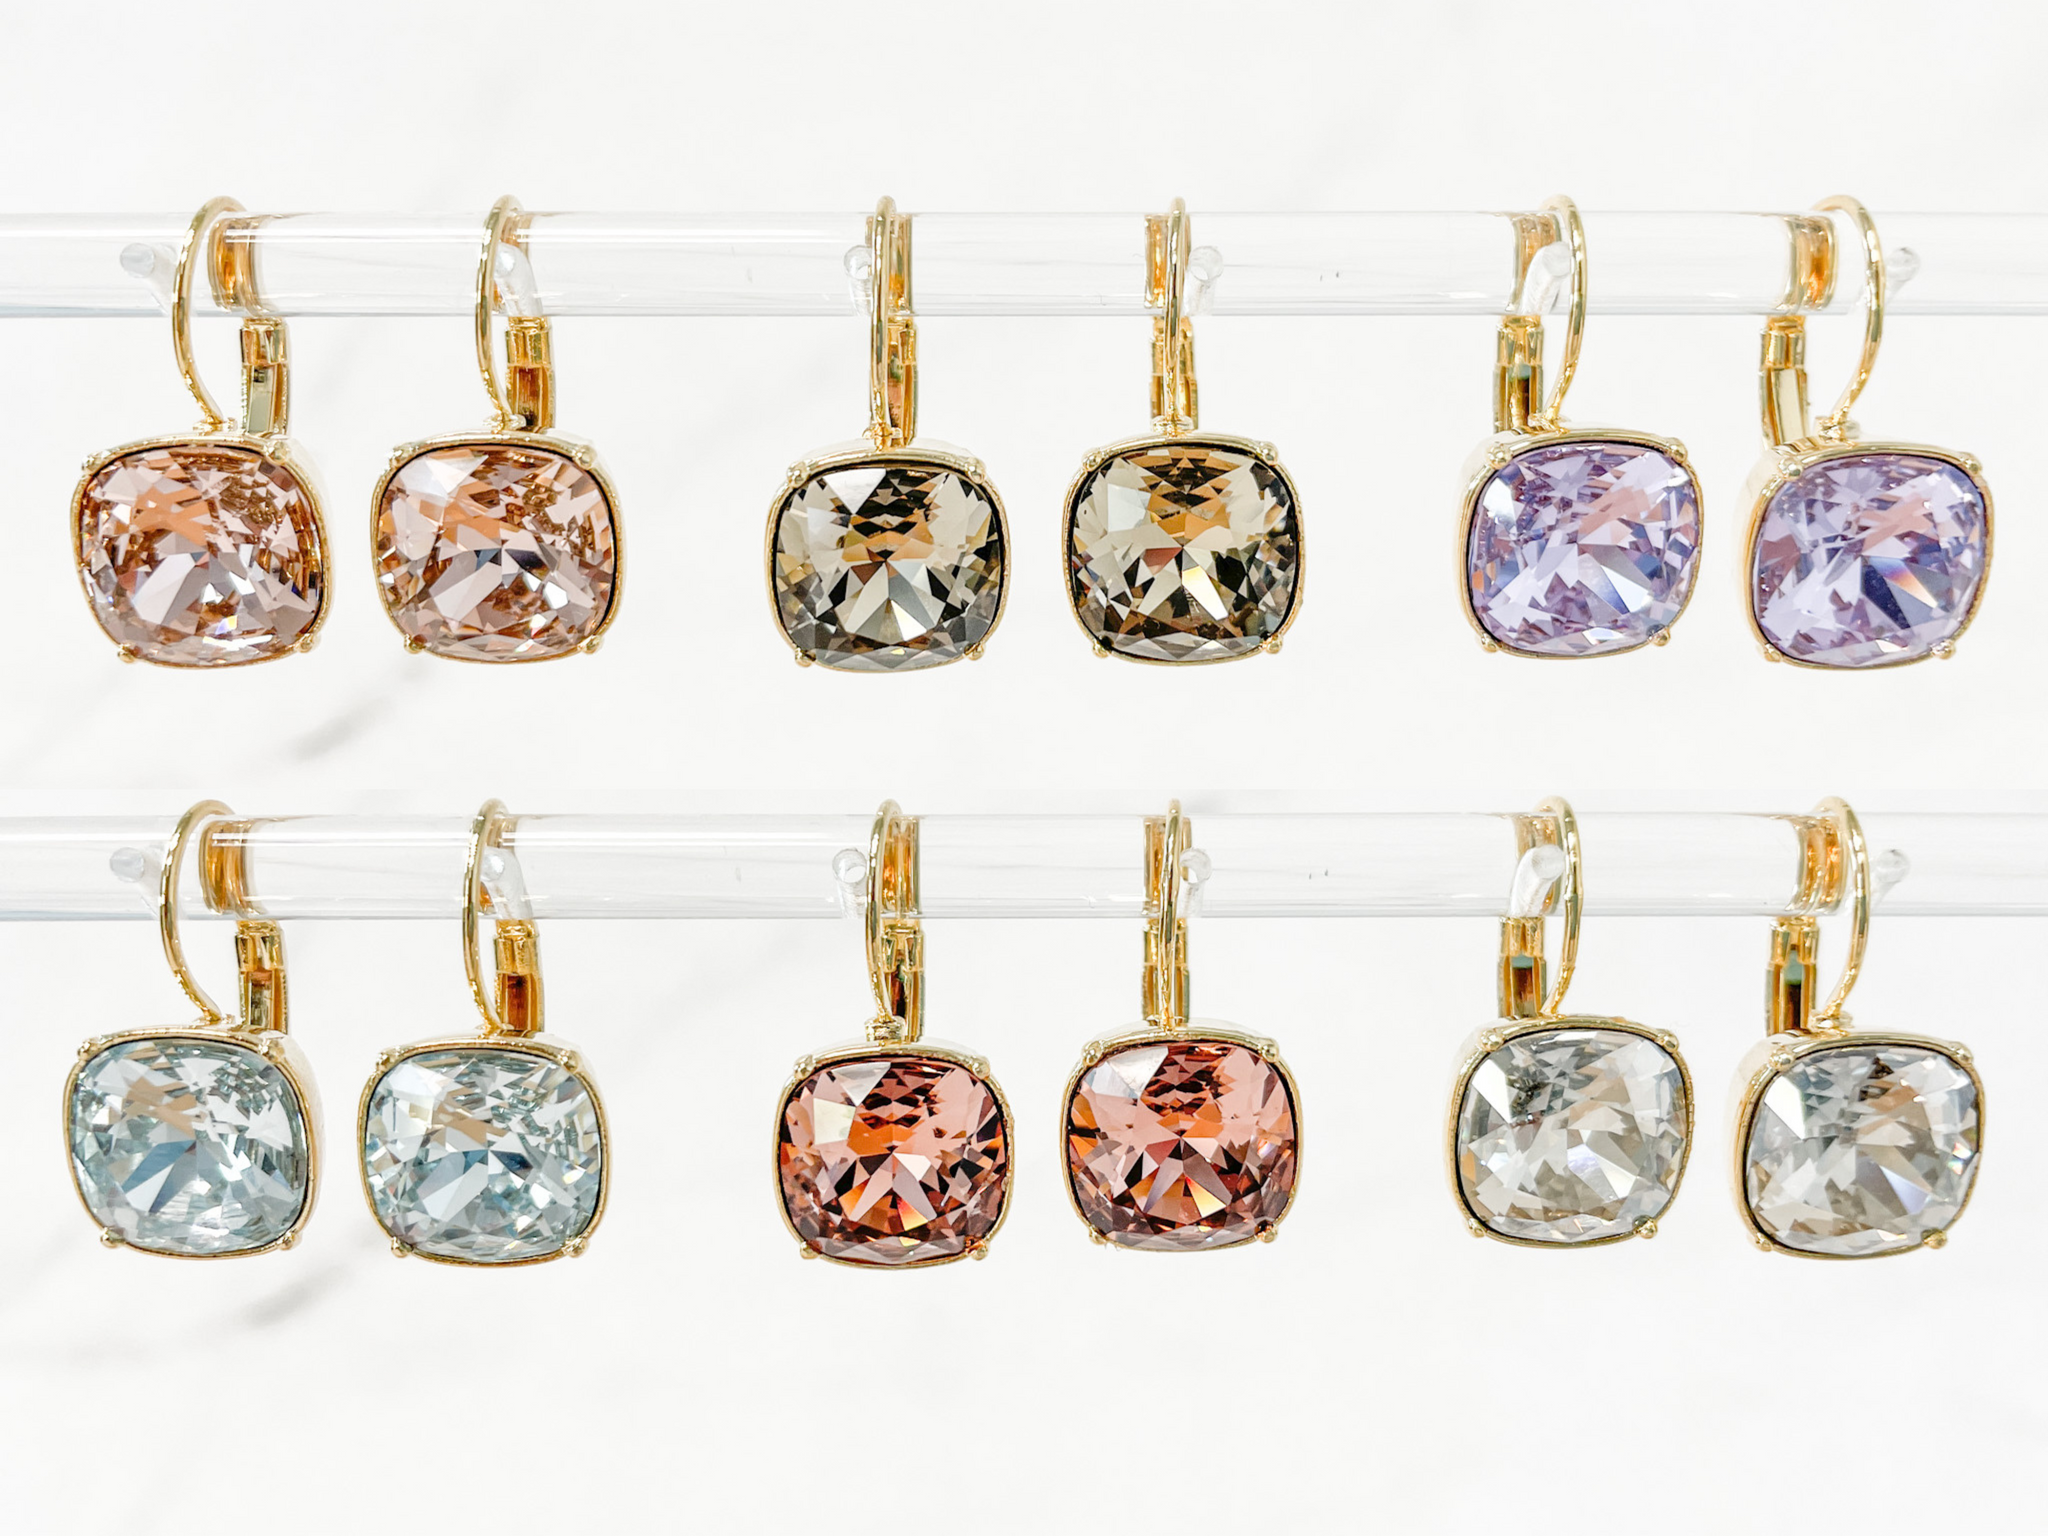 12mm Square | Branded Collection Earrings Made With Swarovski® Crystals |  One Pair